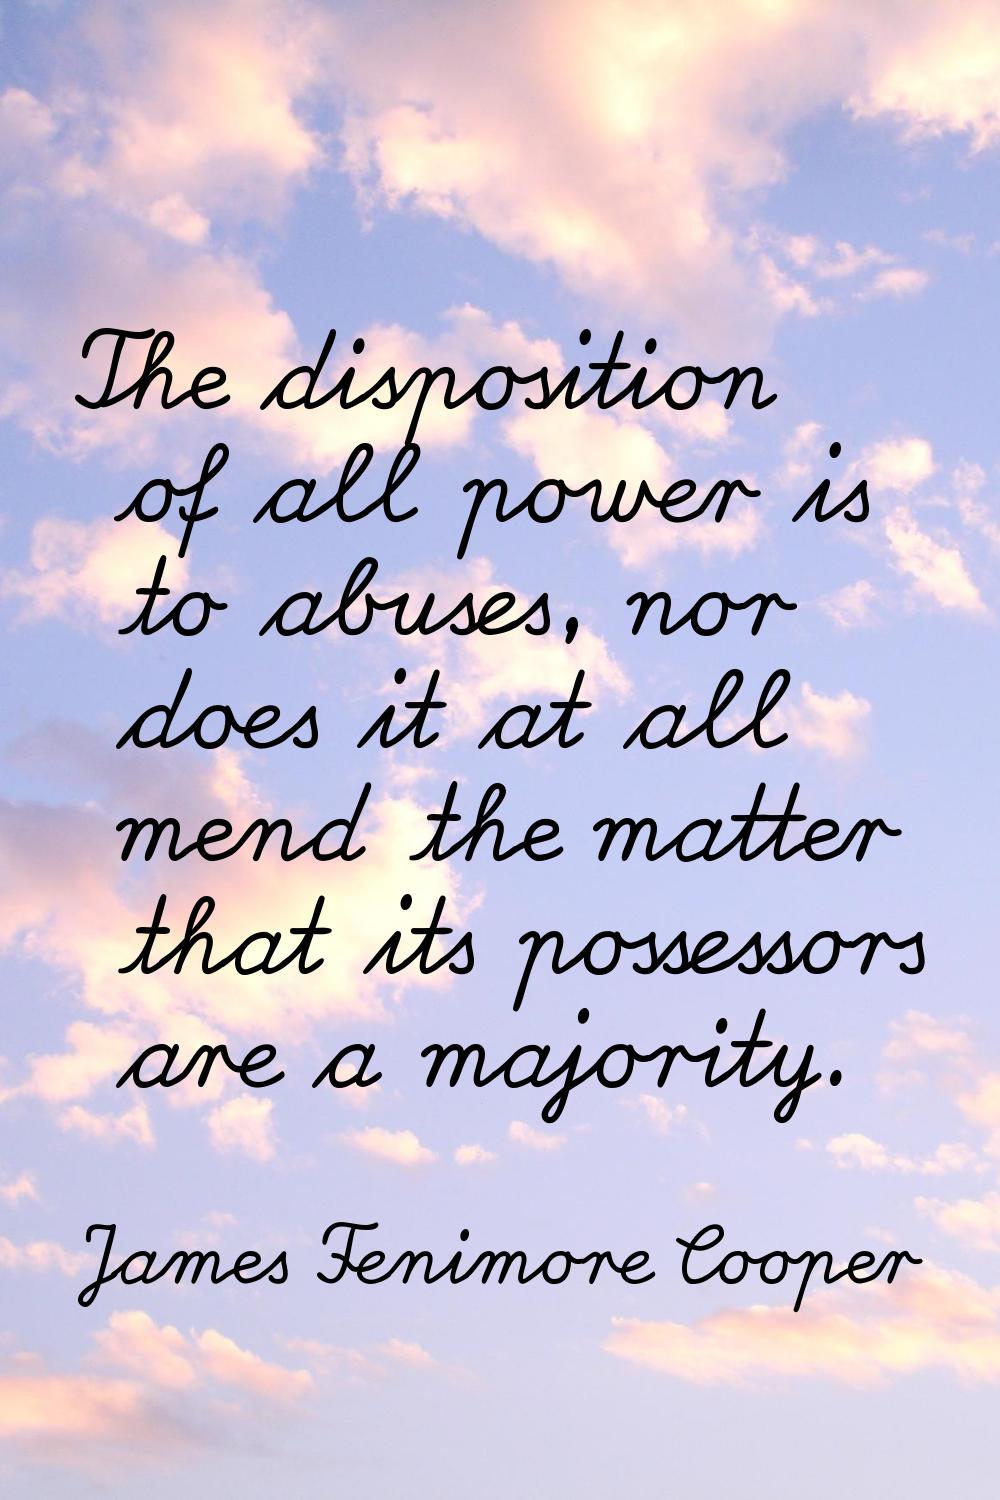 The disposition of all power is to abuses, nor does it at all mend the matter that its possessors a